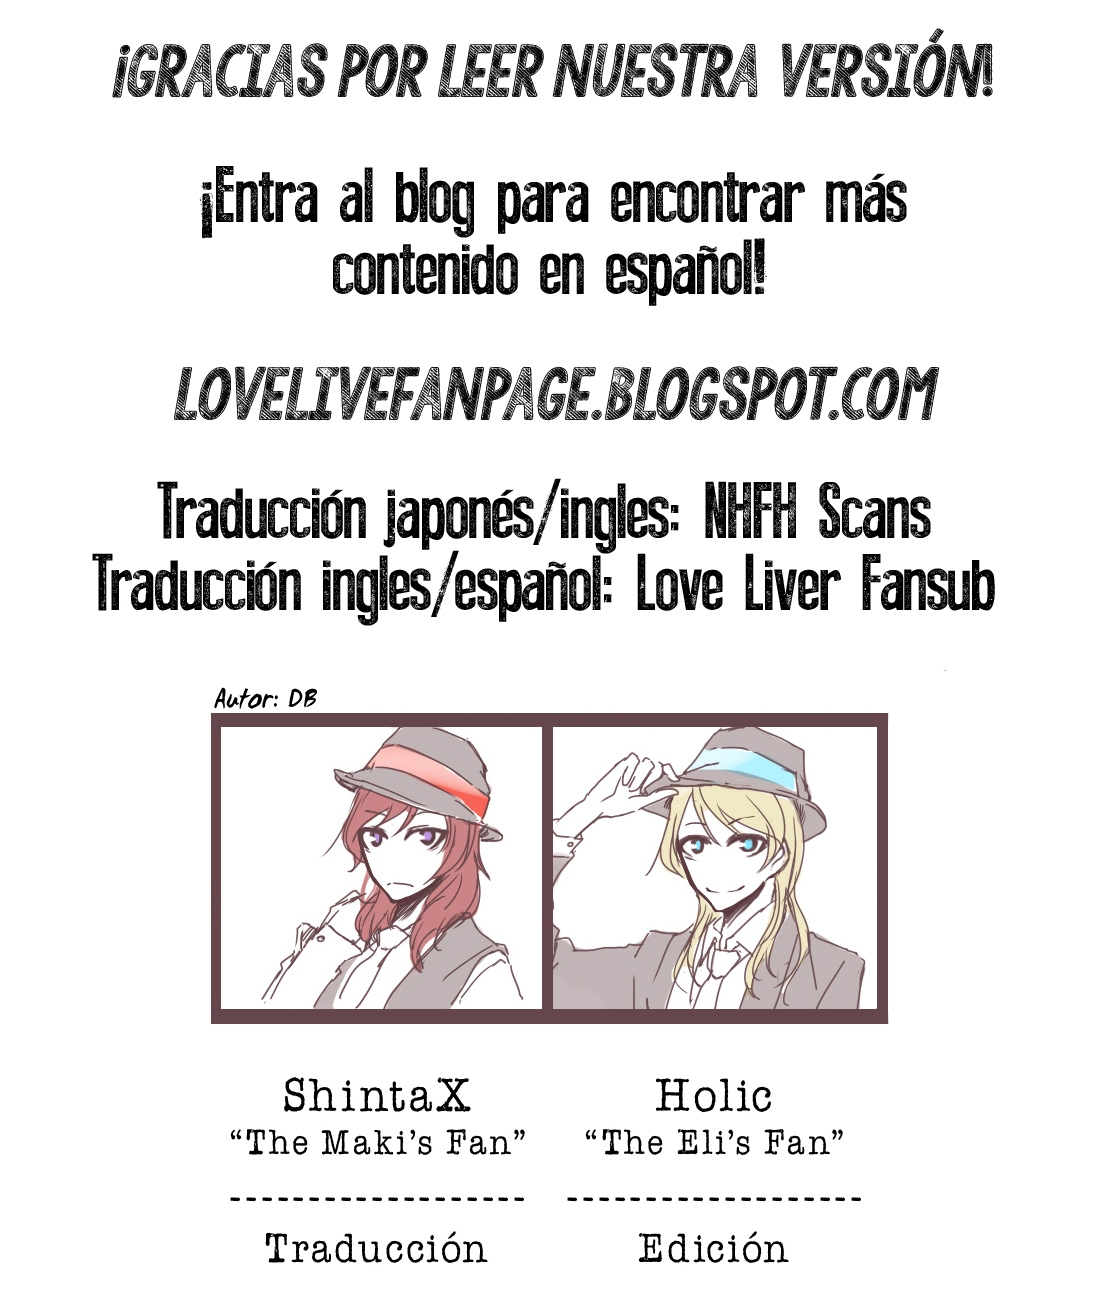 [Manase] Second Years (Love Live) [Spanish] [Love Liver Fansub] 15